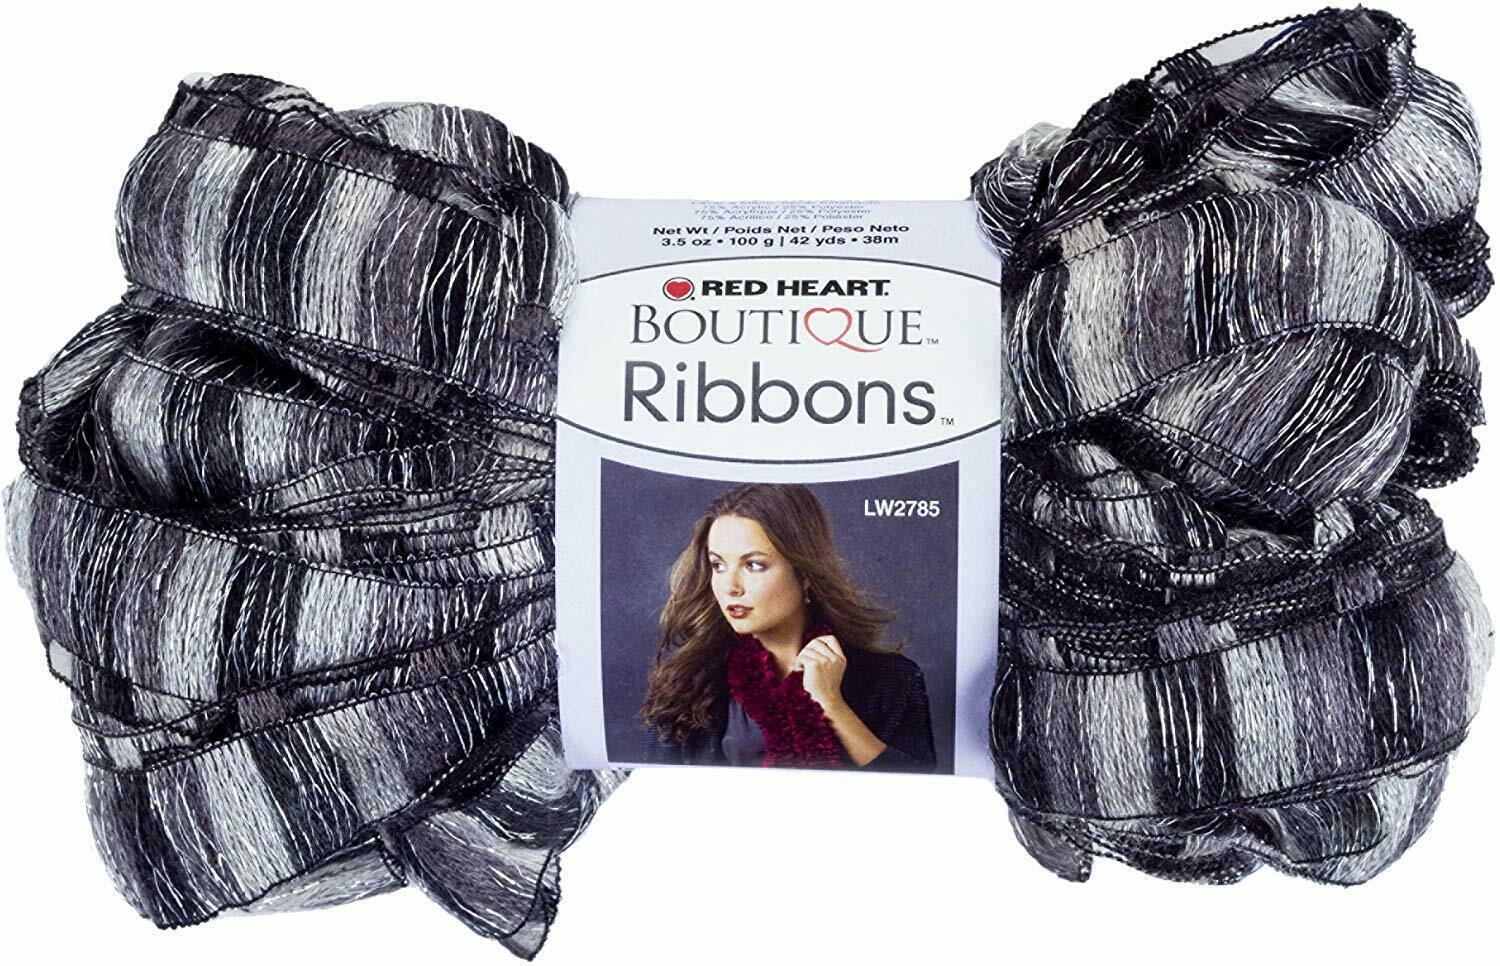 Primary image for Red Heart Boutique Ribbons Yarn, City